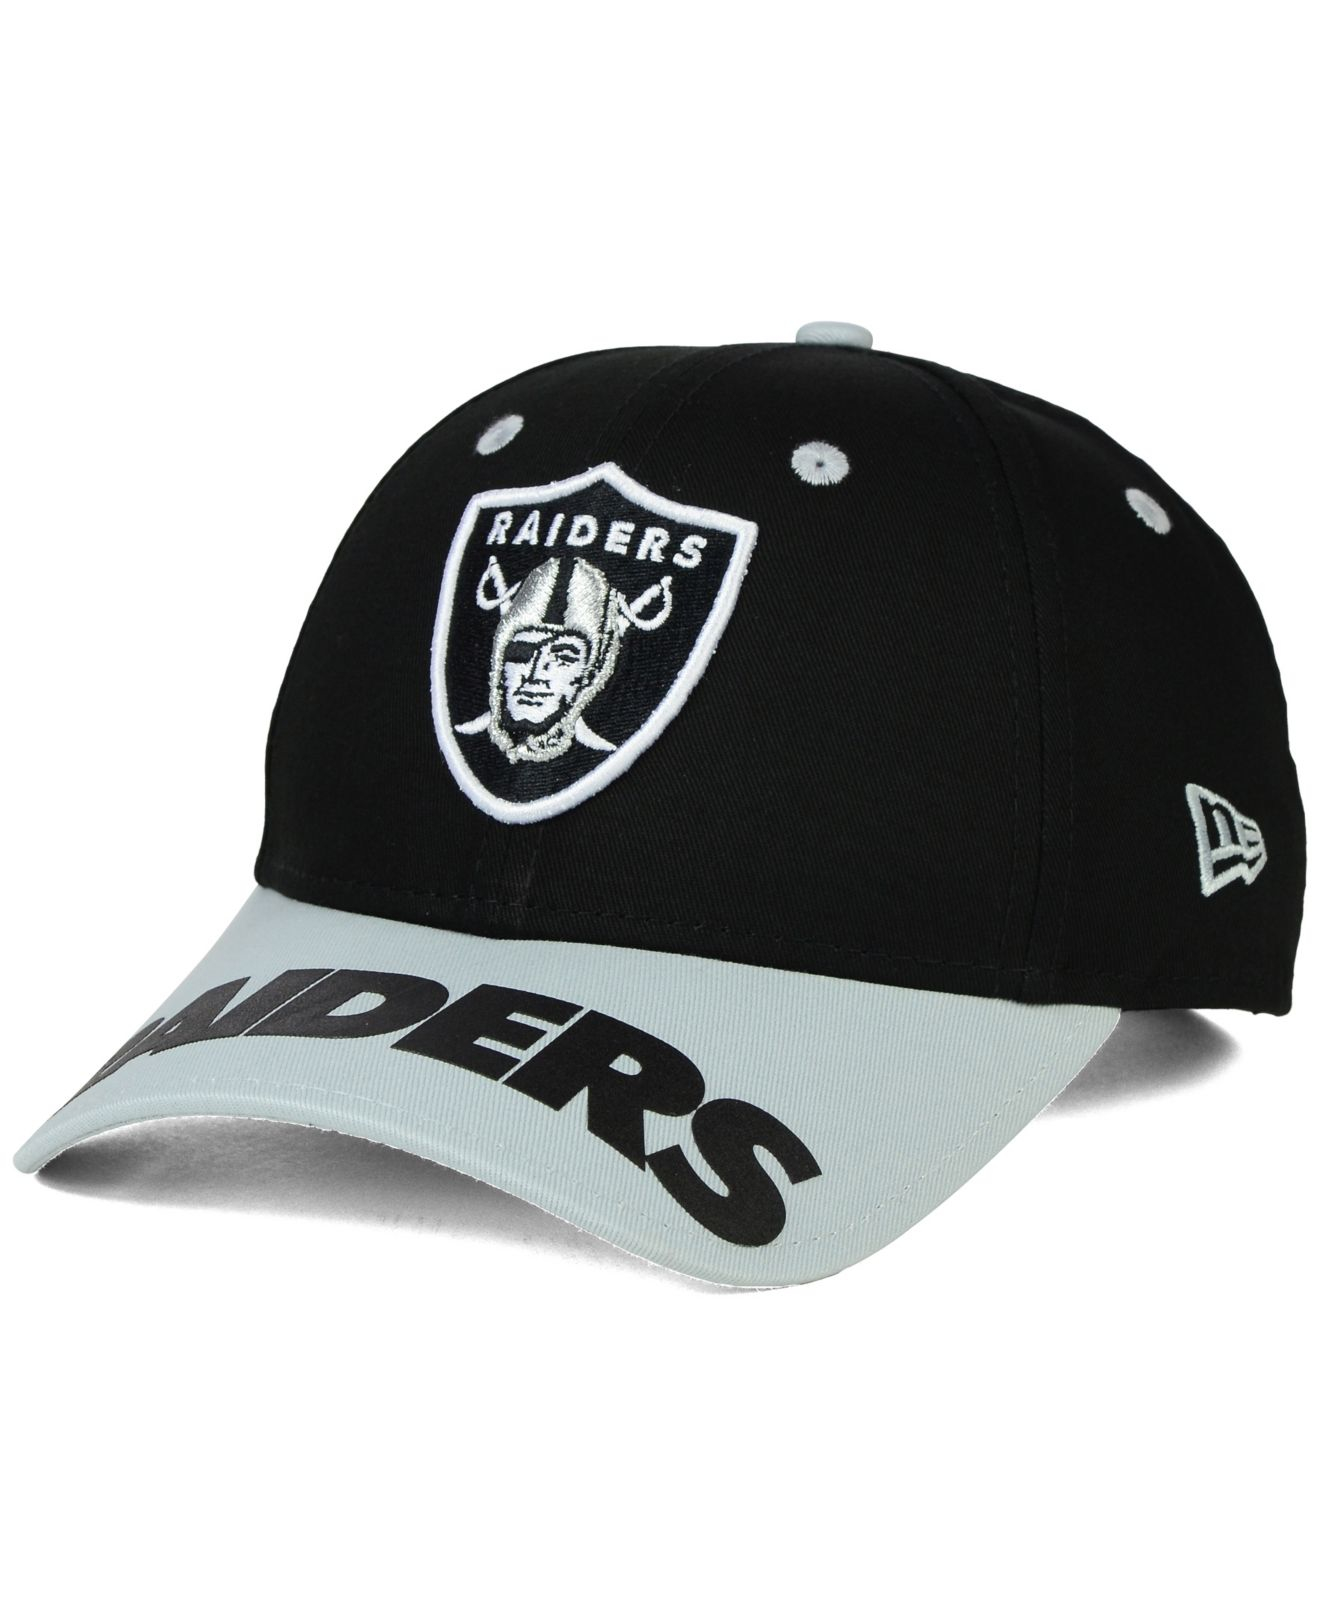 Lyst - Ktz Oakland Raiders Word Pin 2 Tone 9forty Cap in Black for Men